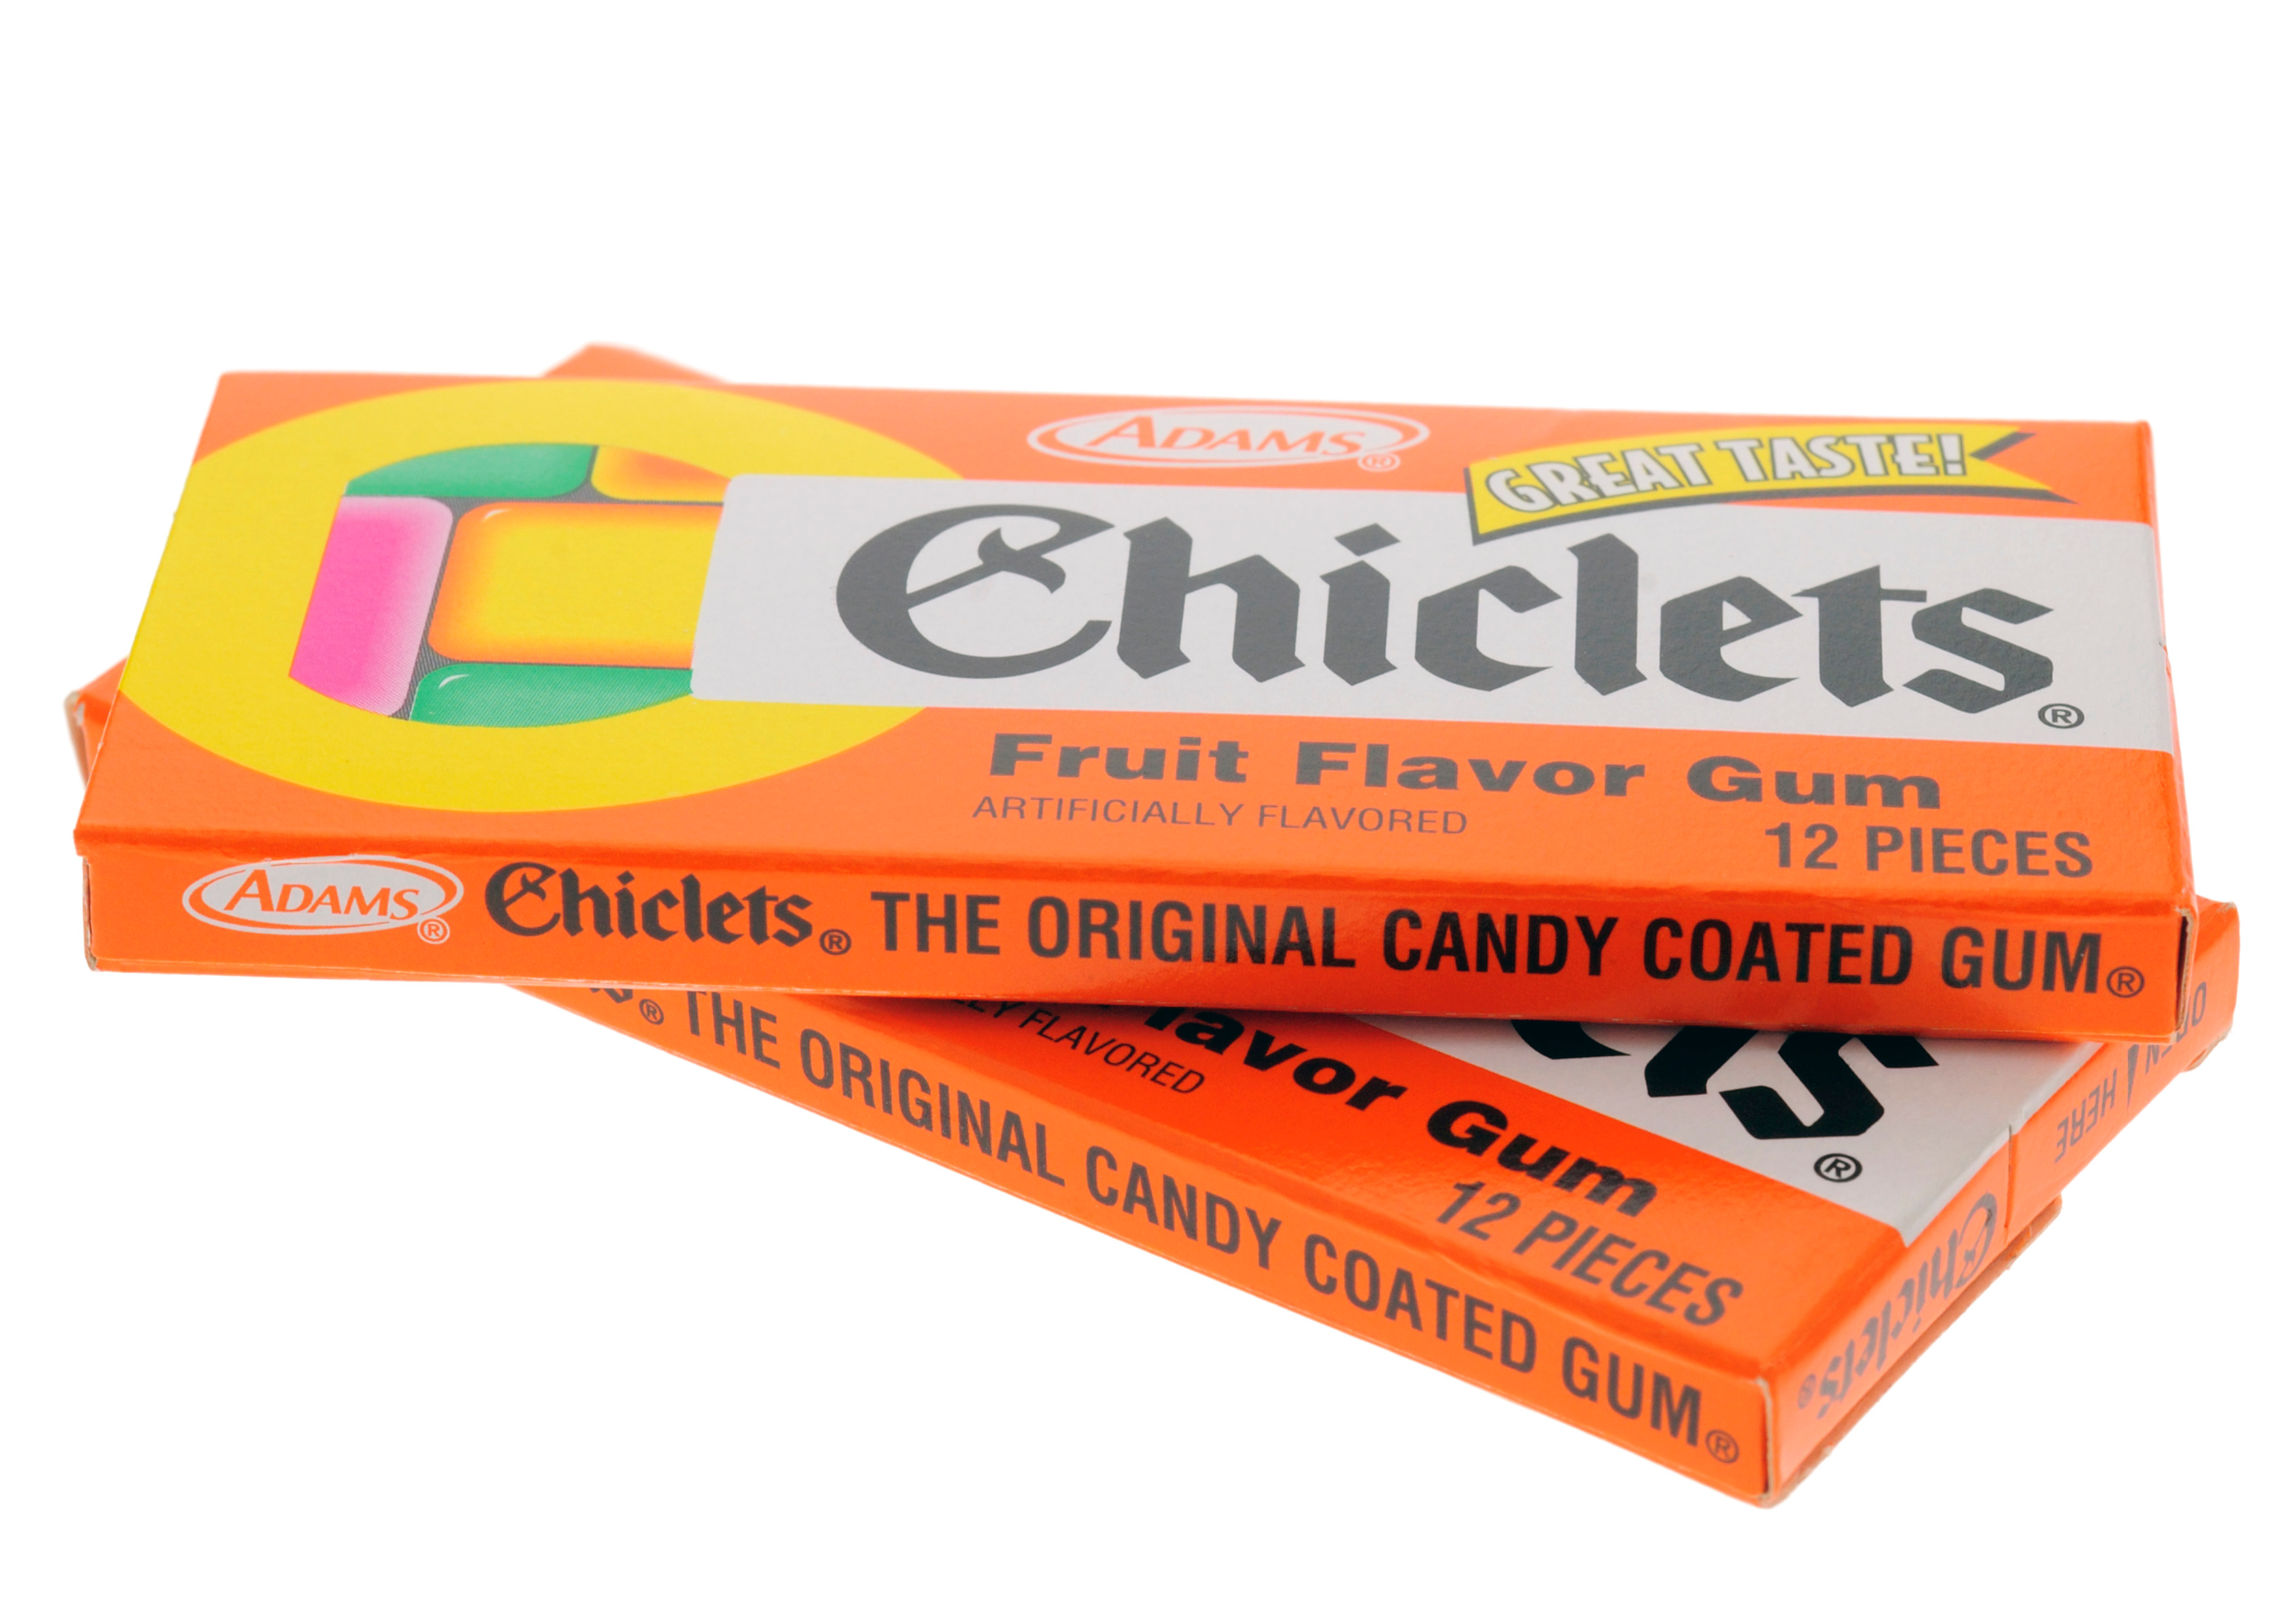 A stack of two bright orange retro packets of Chiclets gum, decorated with candy-color graphics.